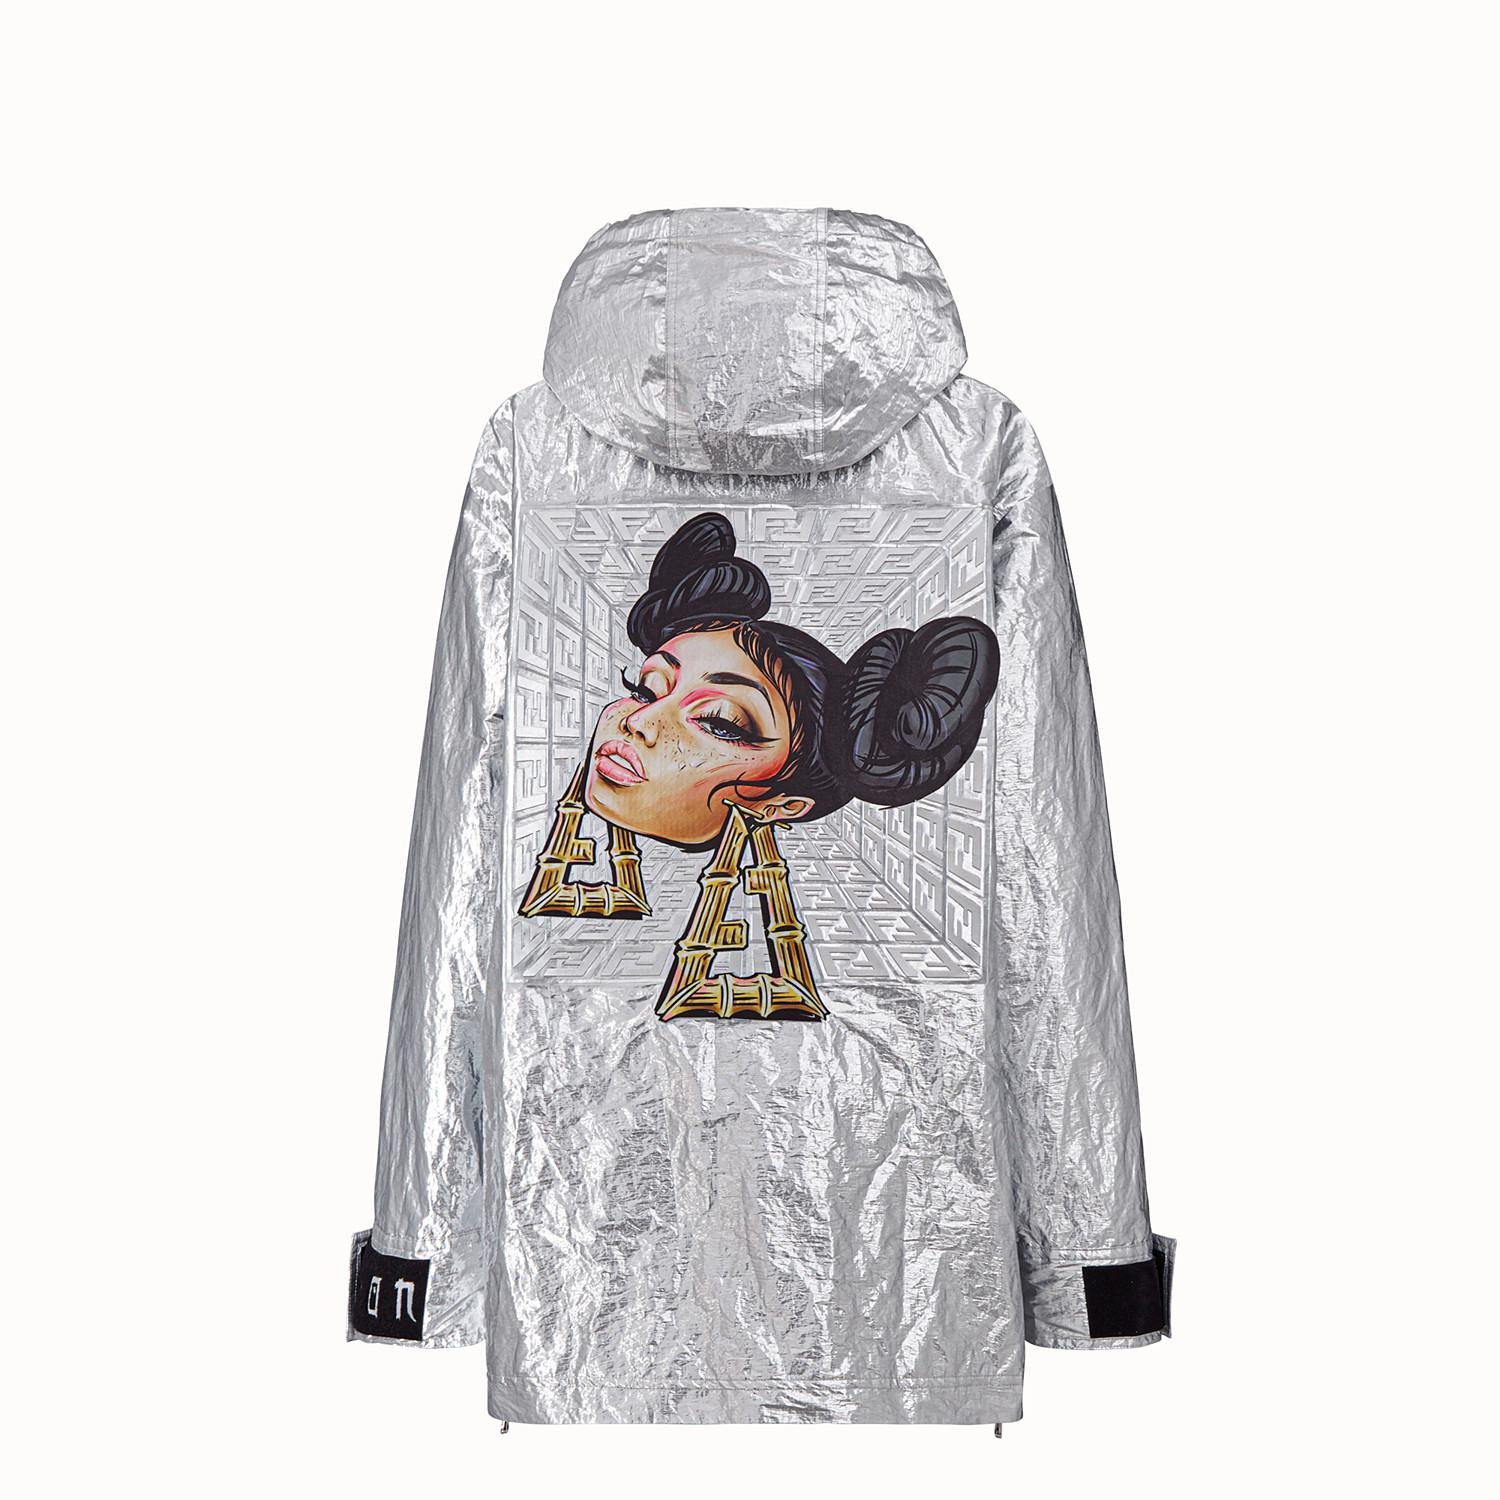 nickiminaj also wore a @chanelofficial jacket (availability and price not  listed online) with her @fendi prints on bamboo earrings.